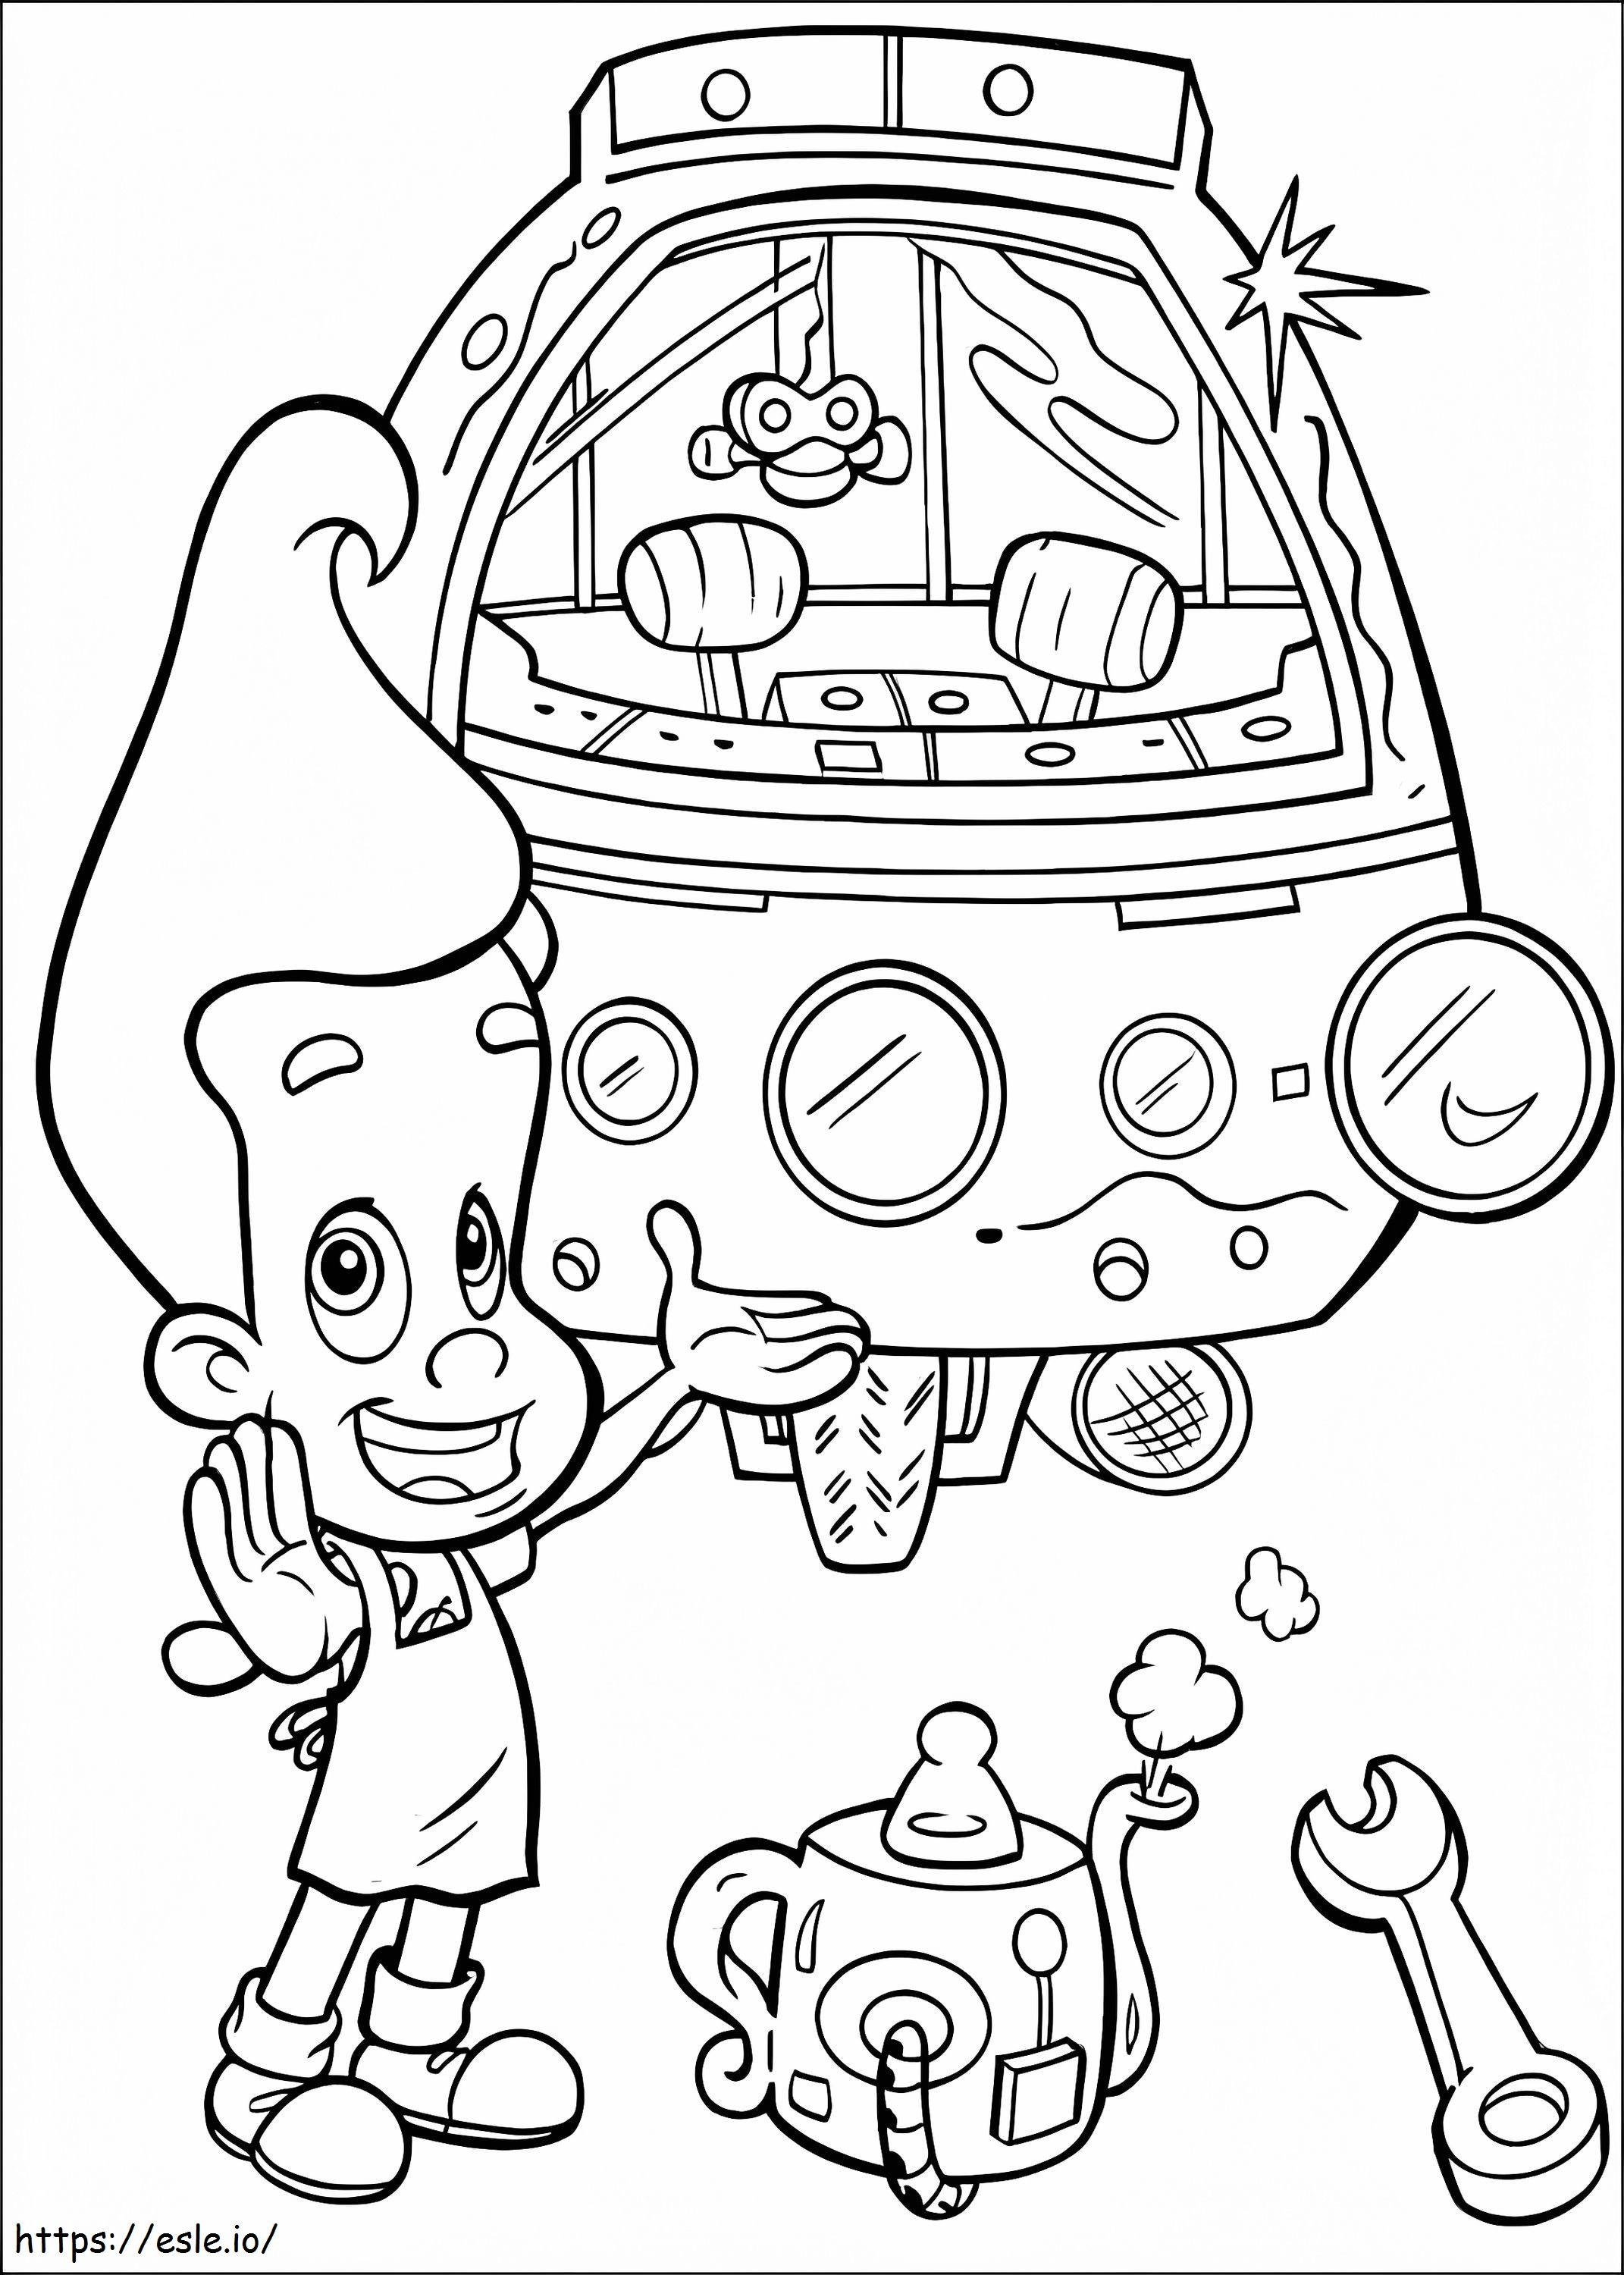 Jimmy Neutron 1 coloring page